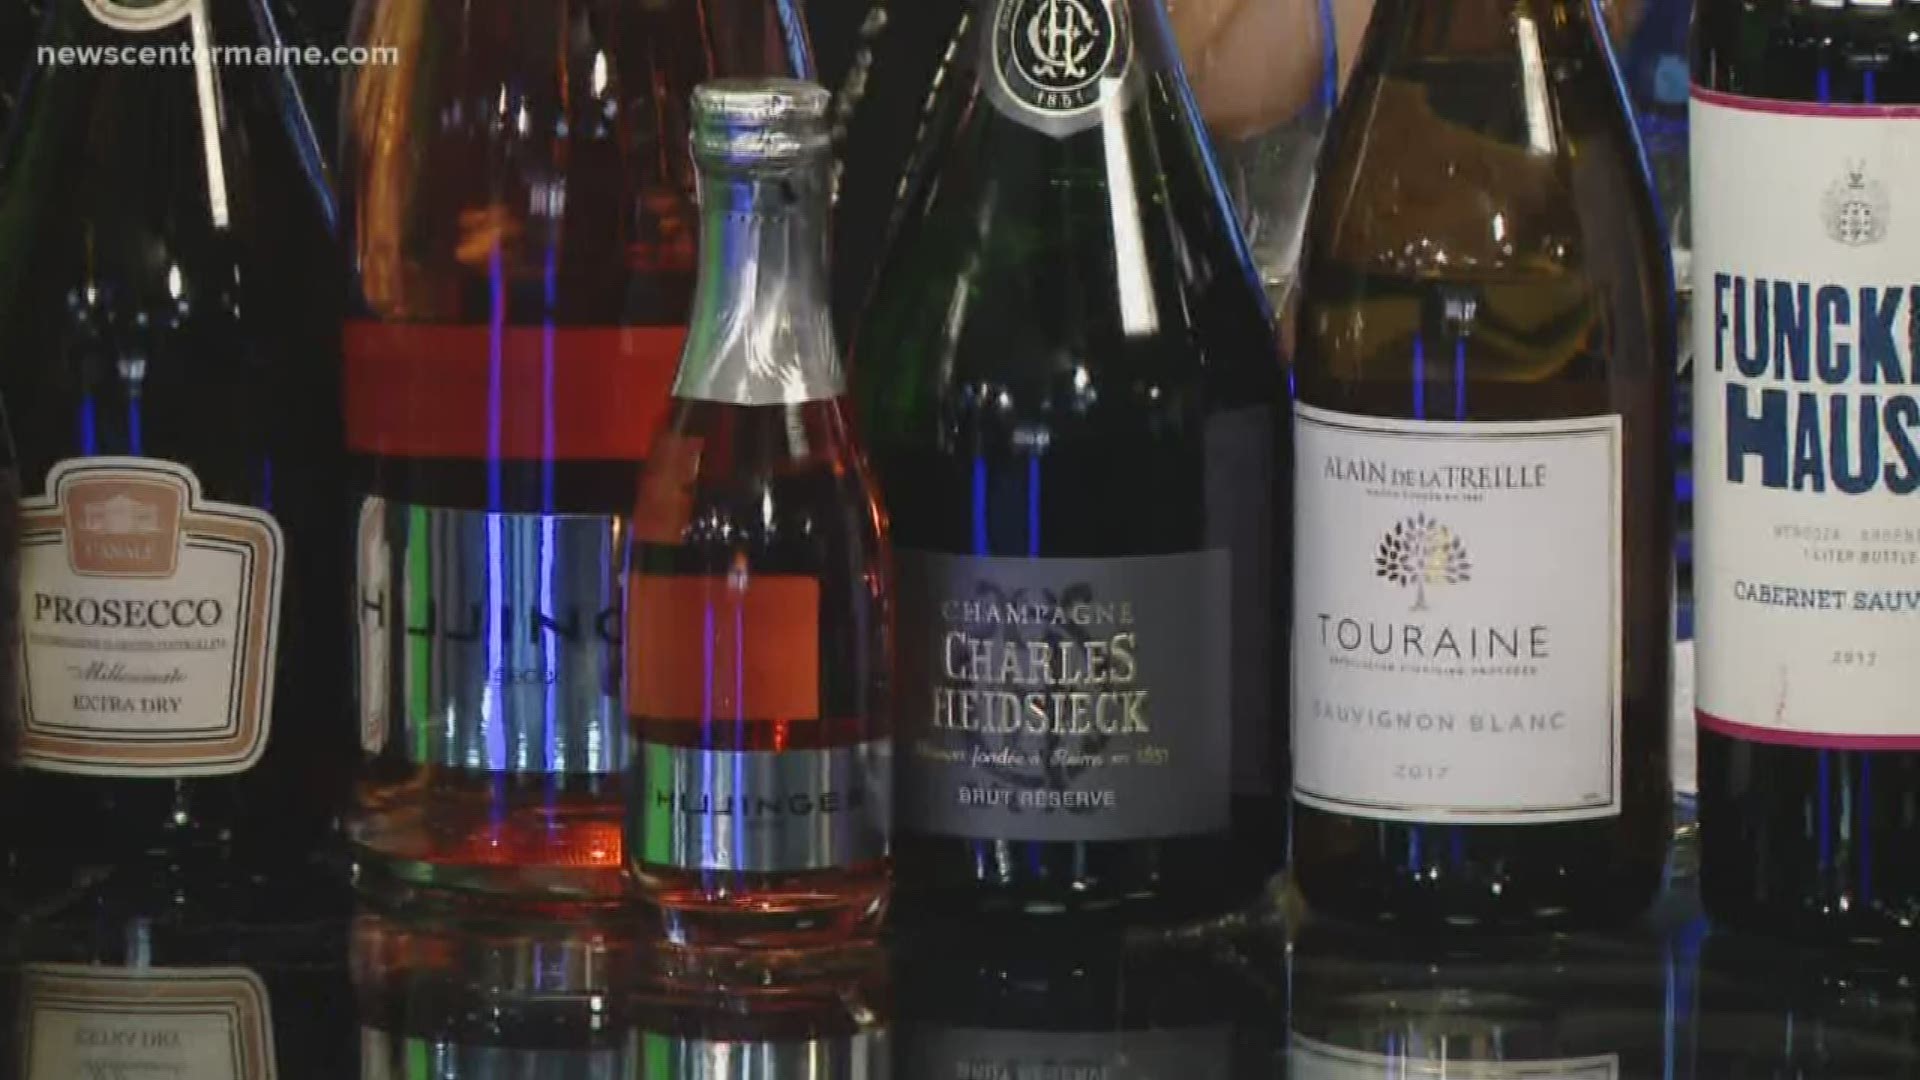 Maia Gosselin shares some wines you can enjoy and serve this holiday season.